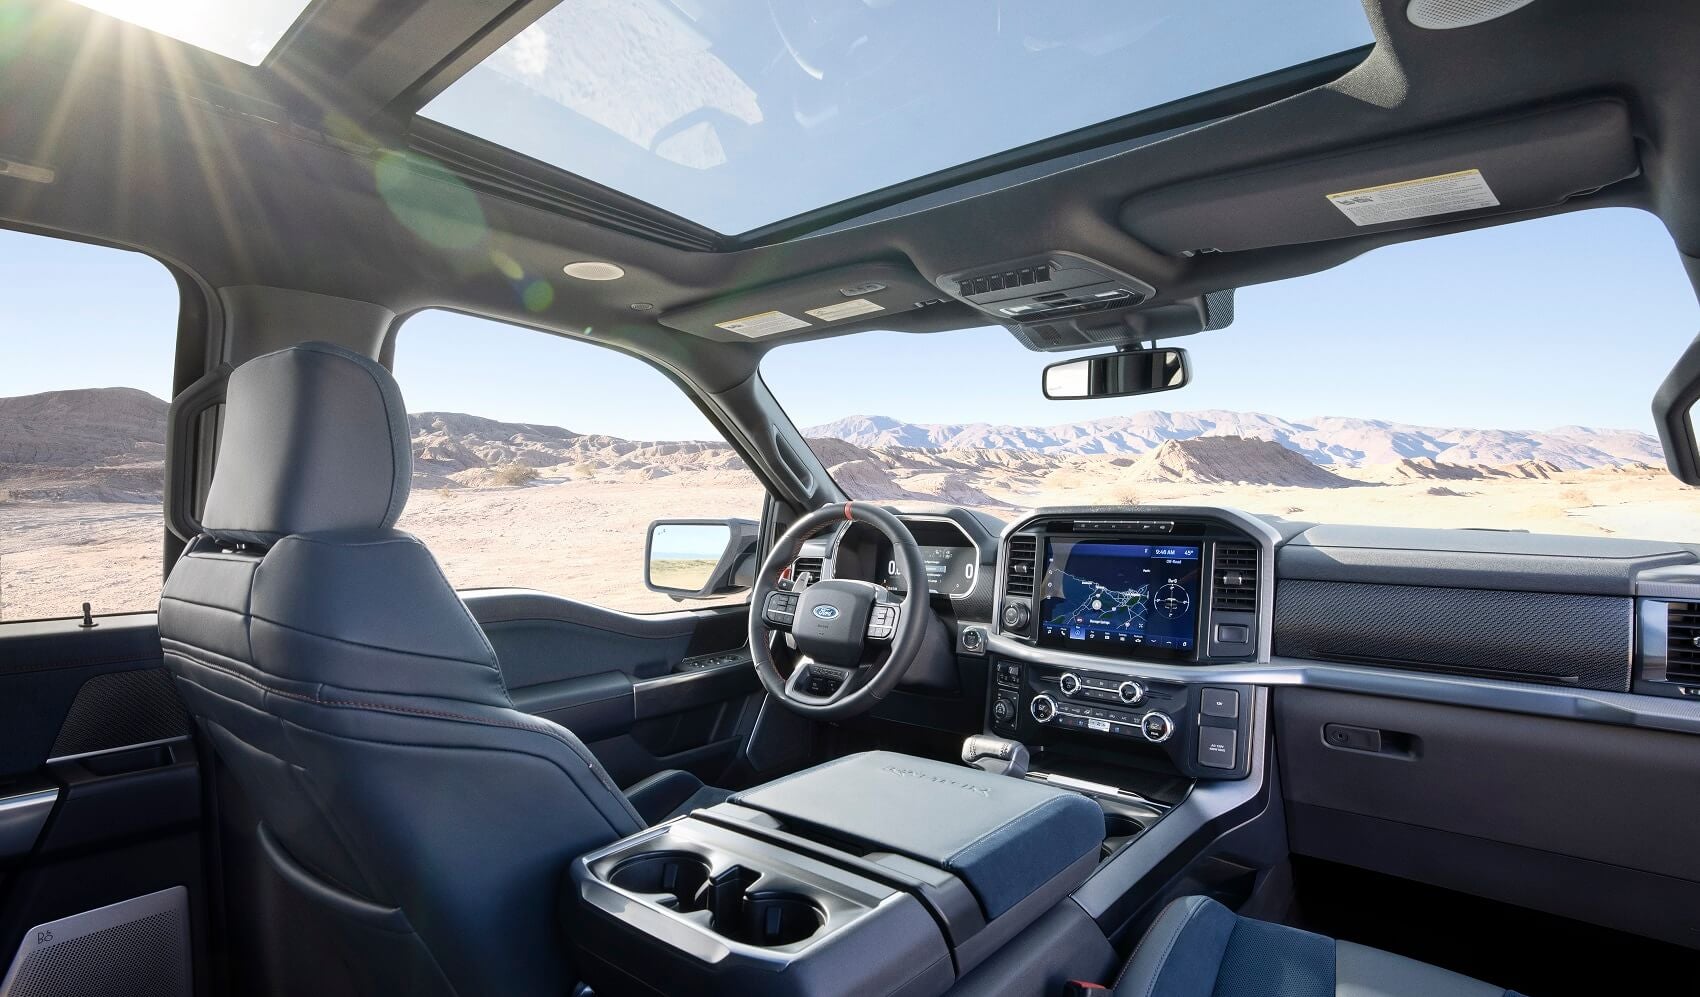 What’s the Seating Capacity of the Ford F-150?